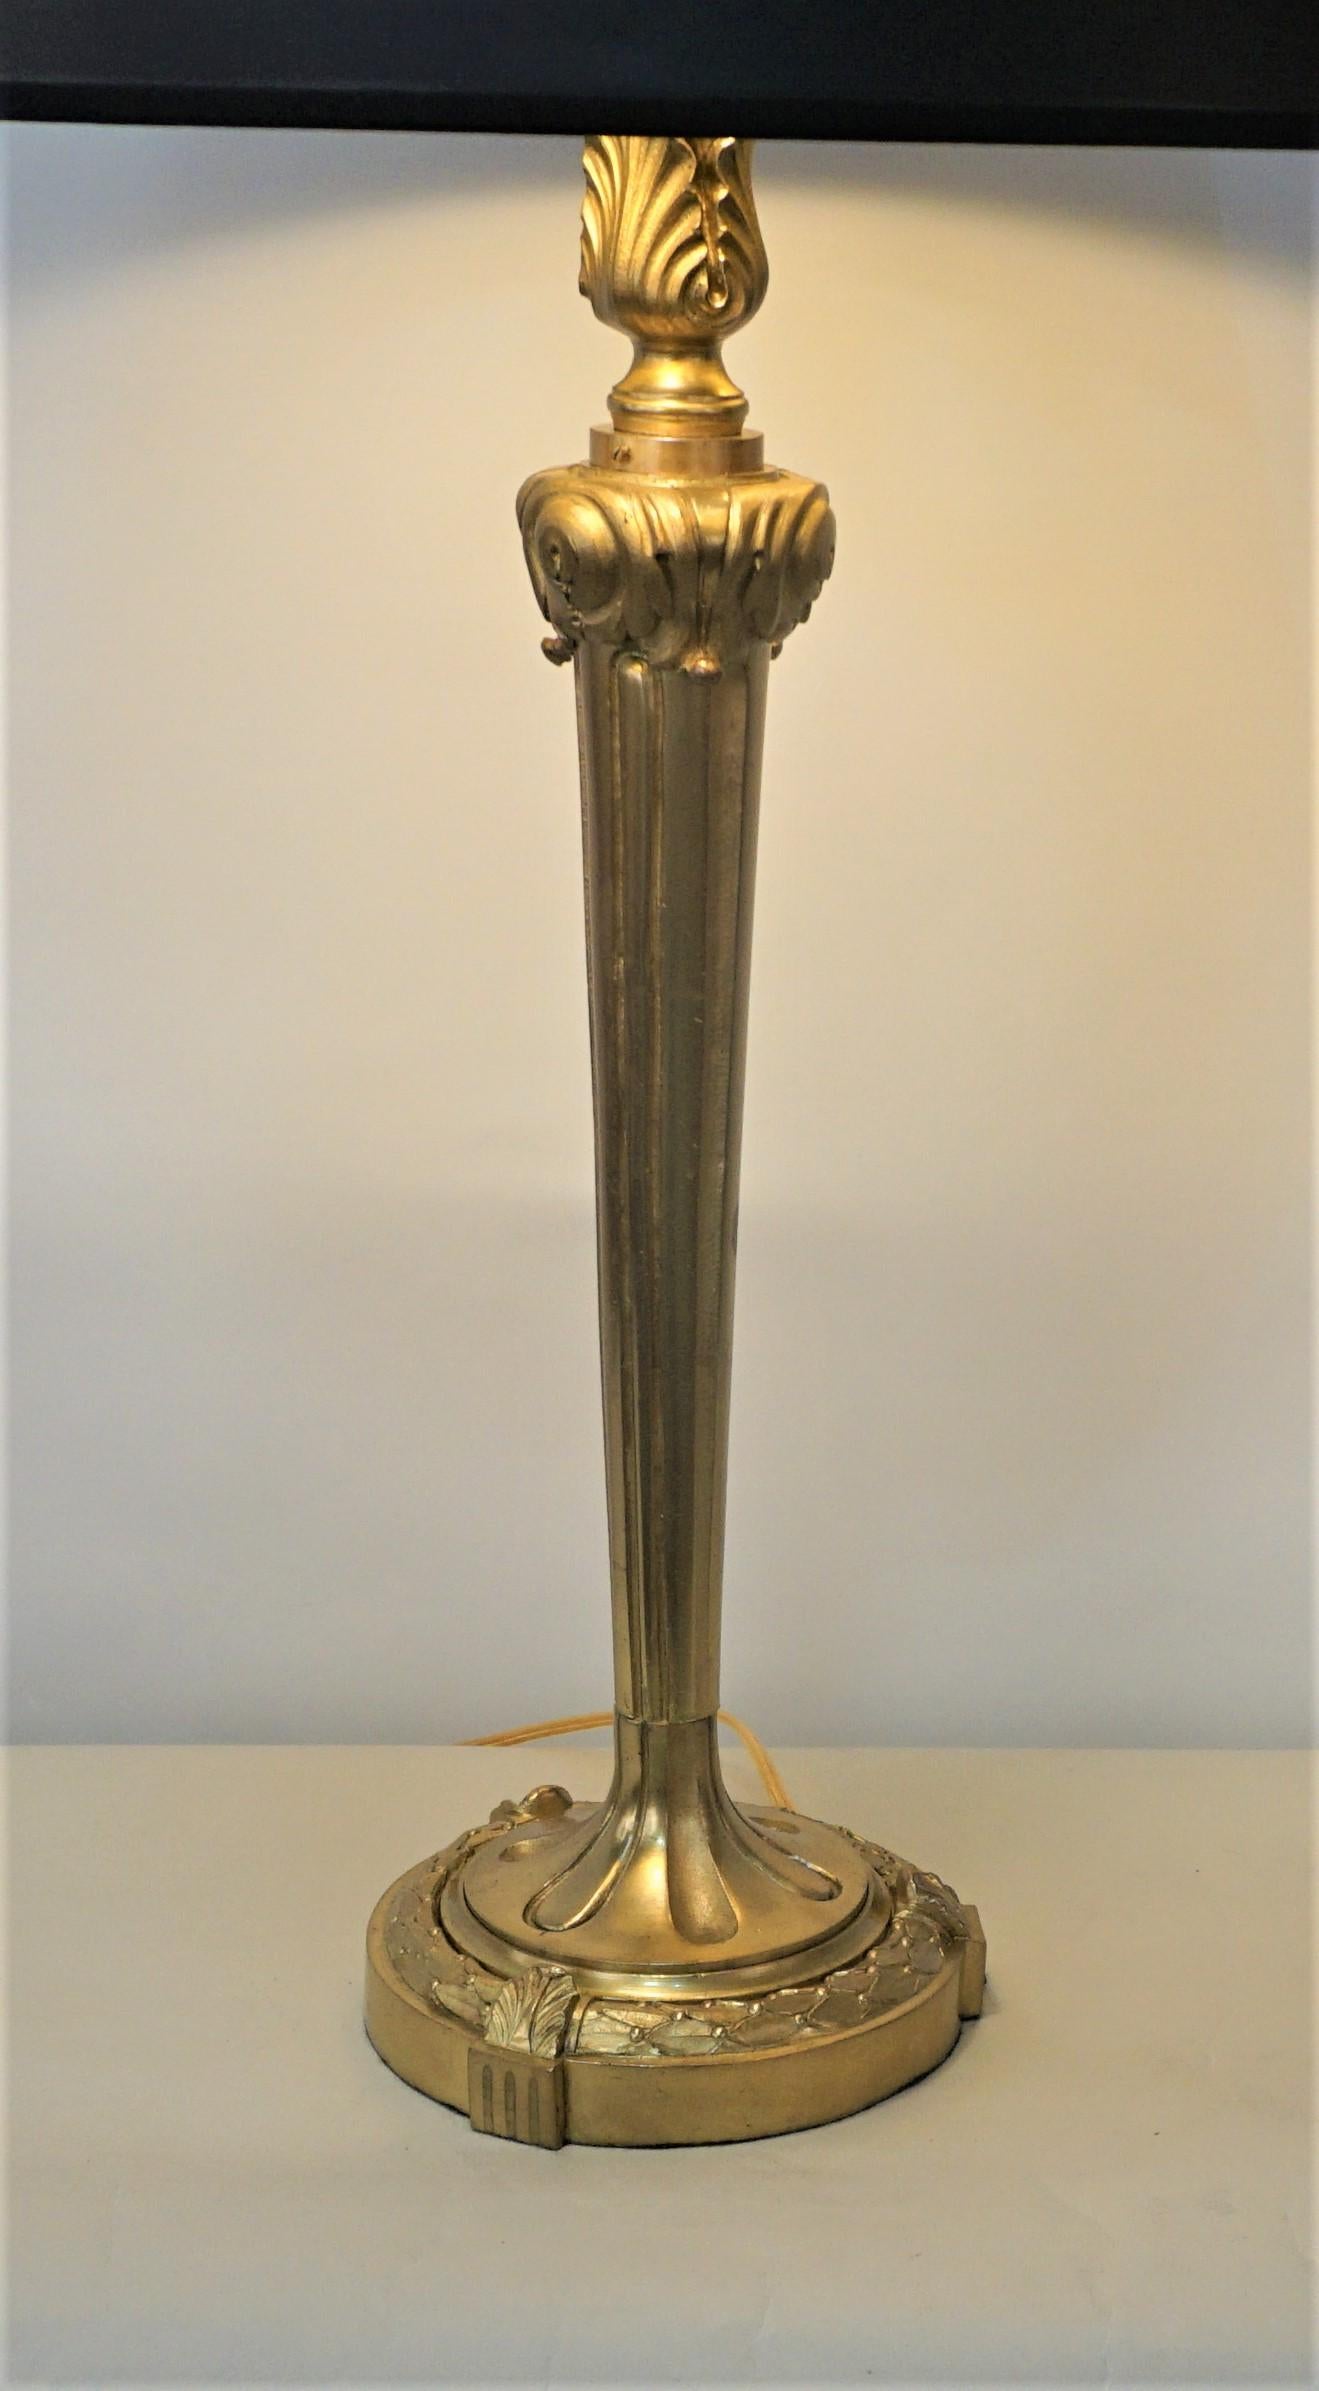 An elegant bronze table lamp with adjustable height double pull chain lights and fitted with black gold liner shade.